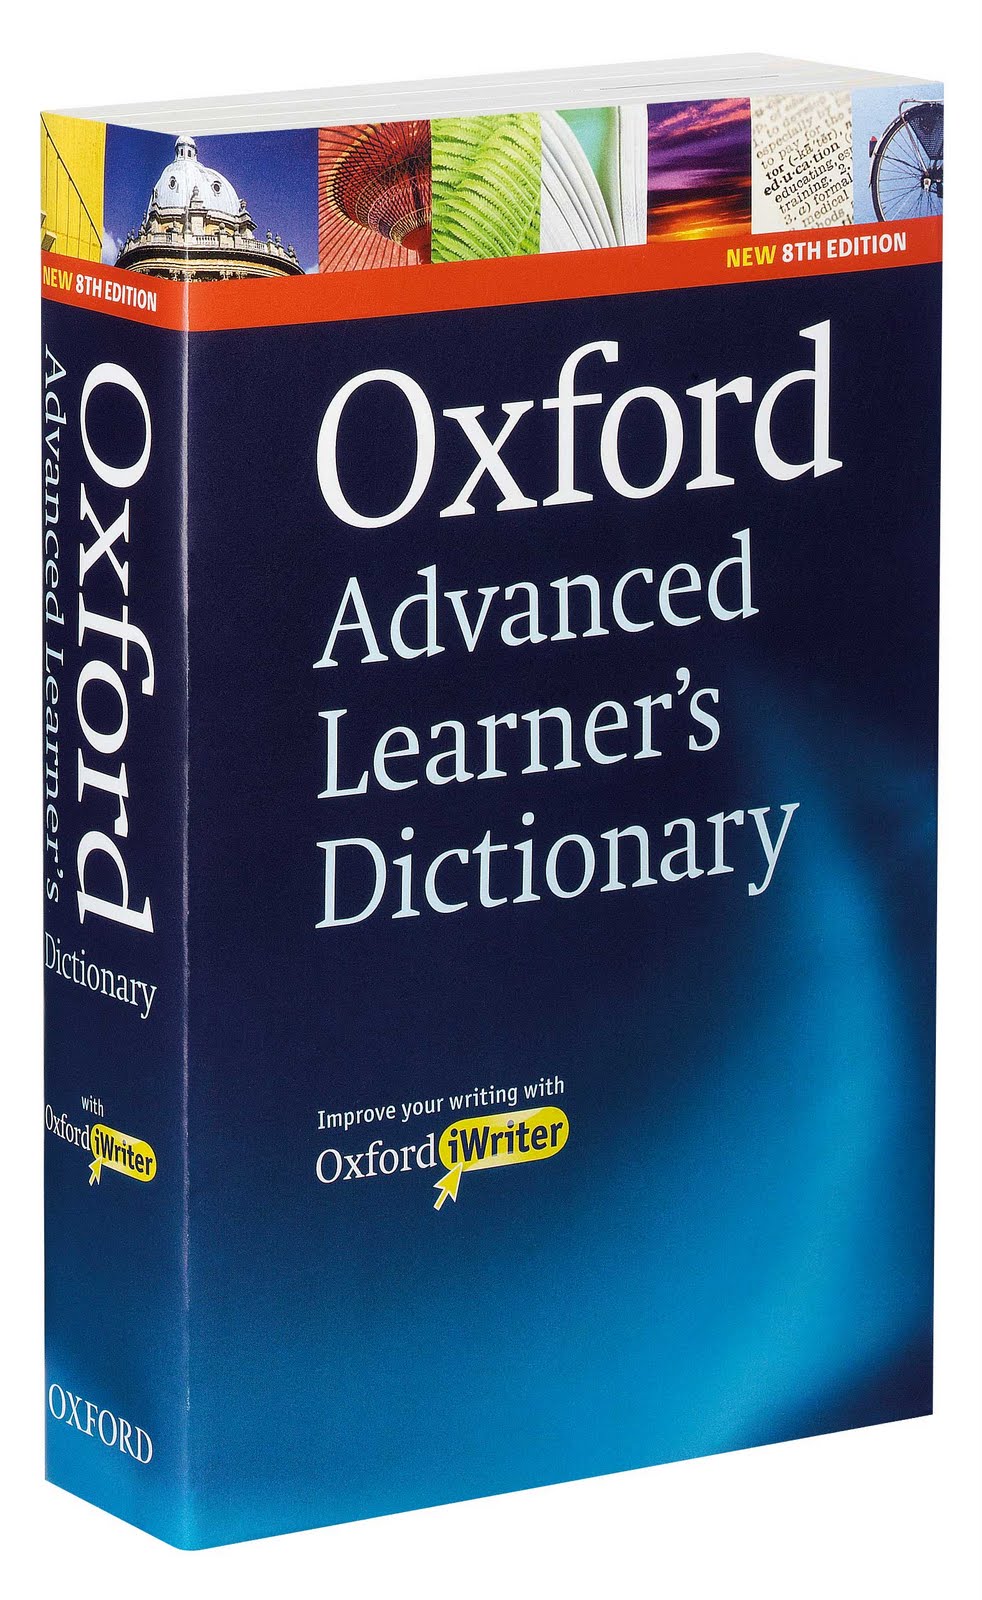 Oxford Advanced Learner's Dictionary 8th Edition Tesla